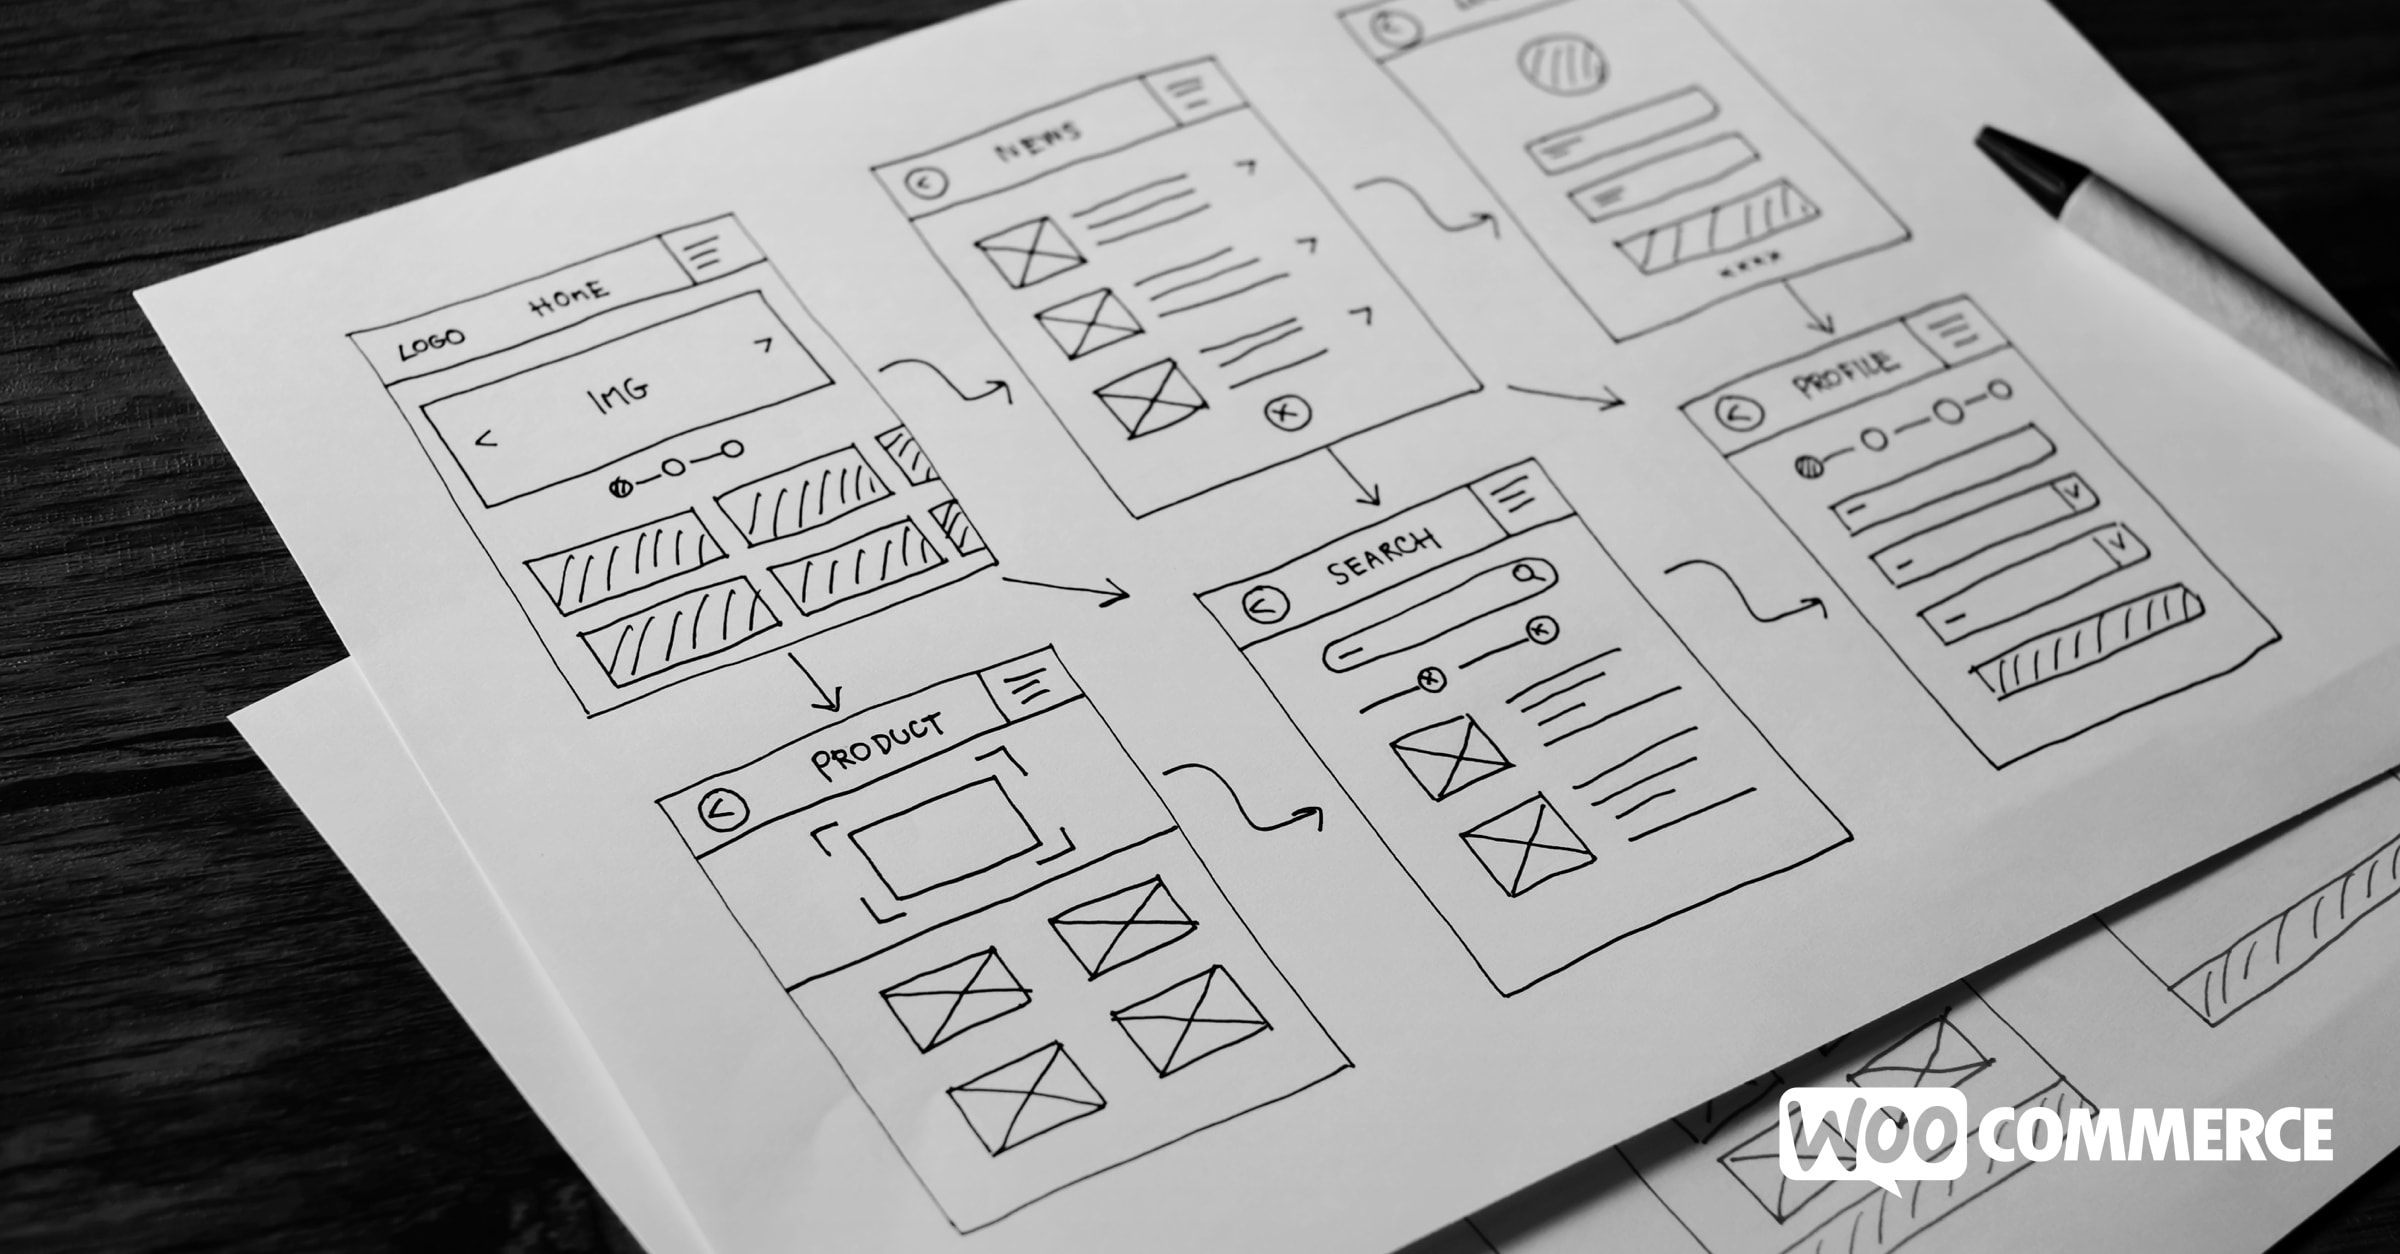 website wireframe with elements like sliders